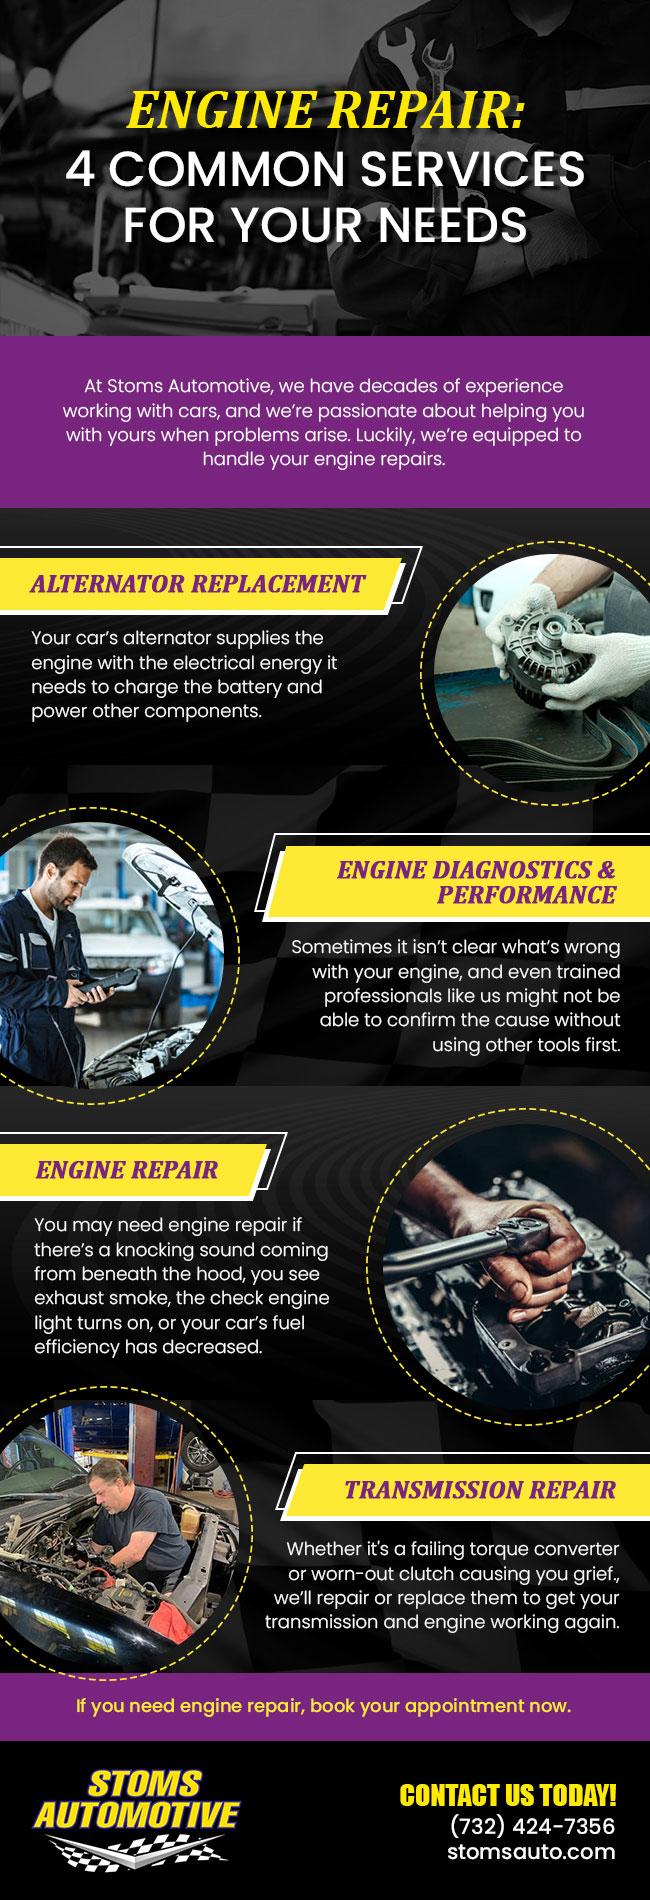 Engine Repair: 4 Common Services for Your Needs